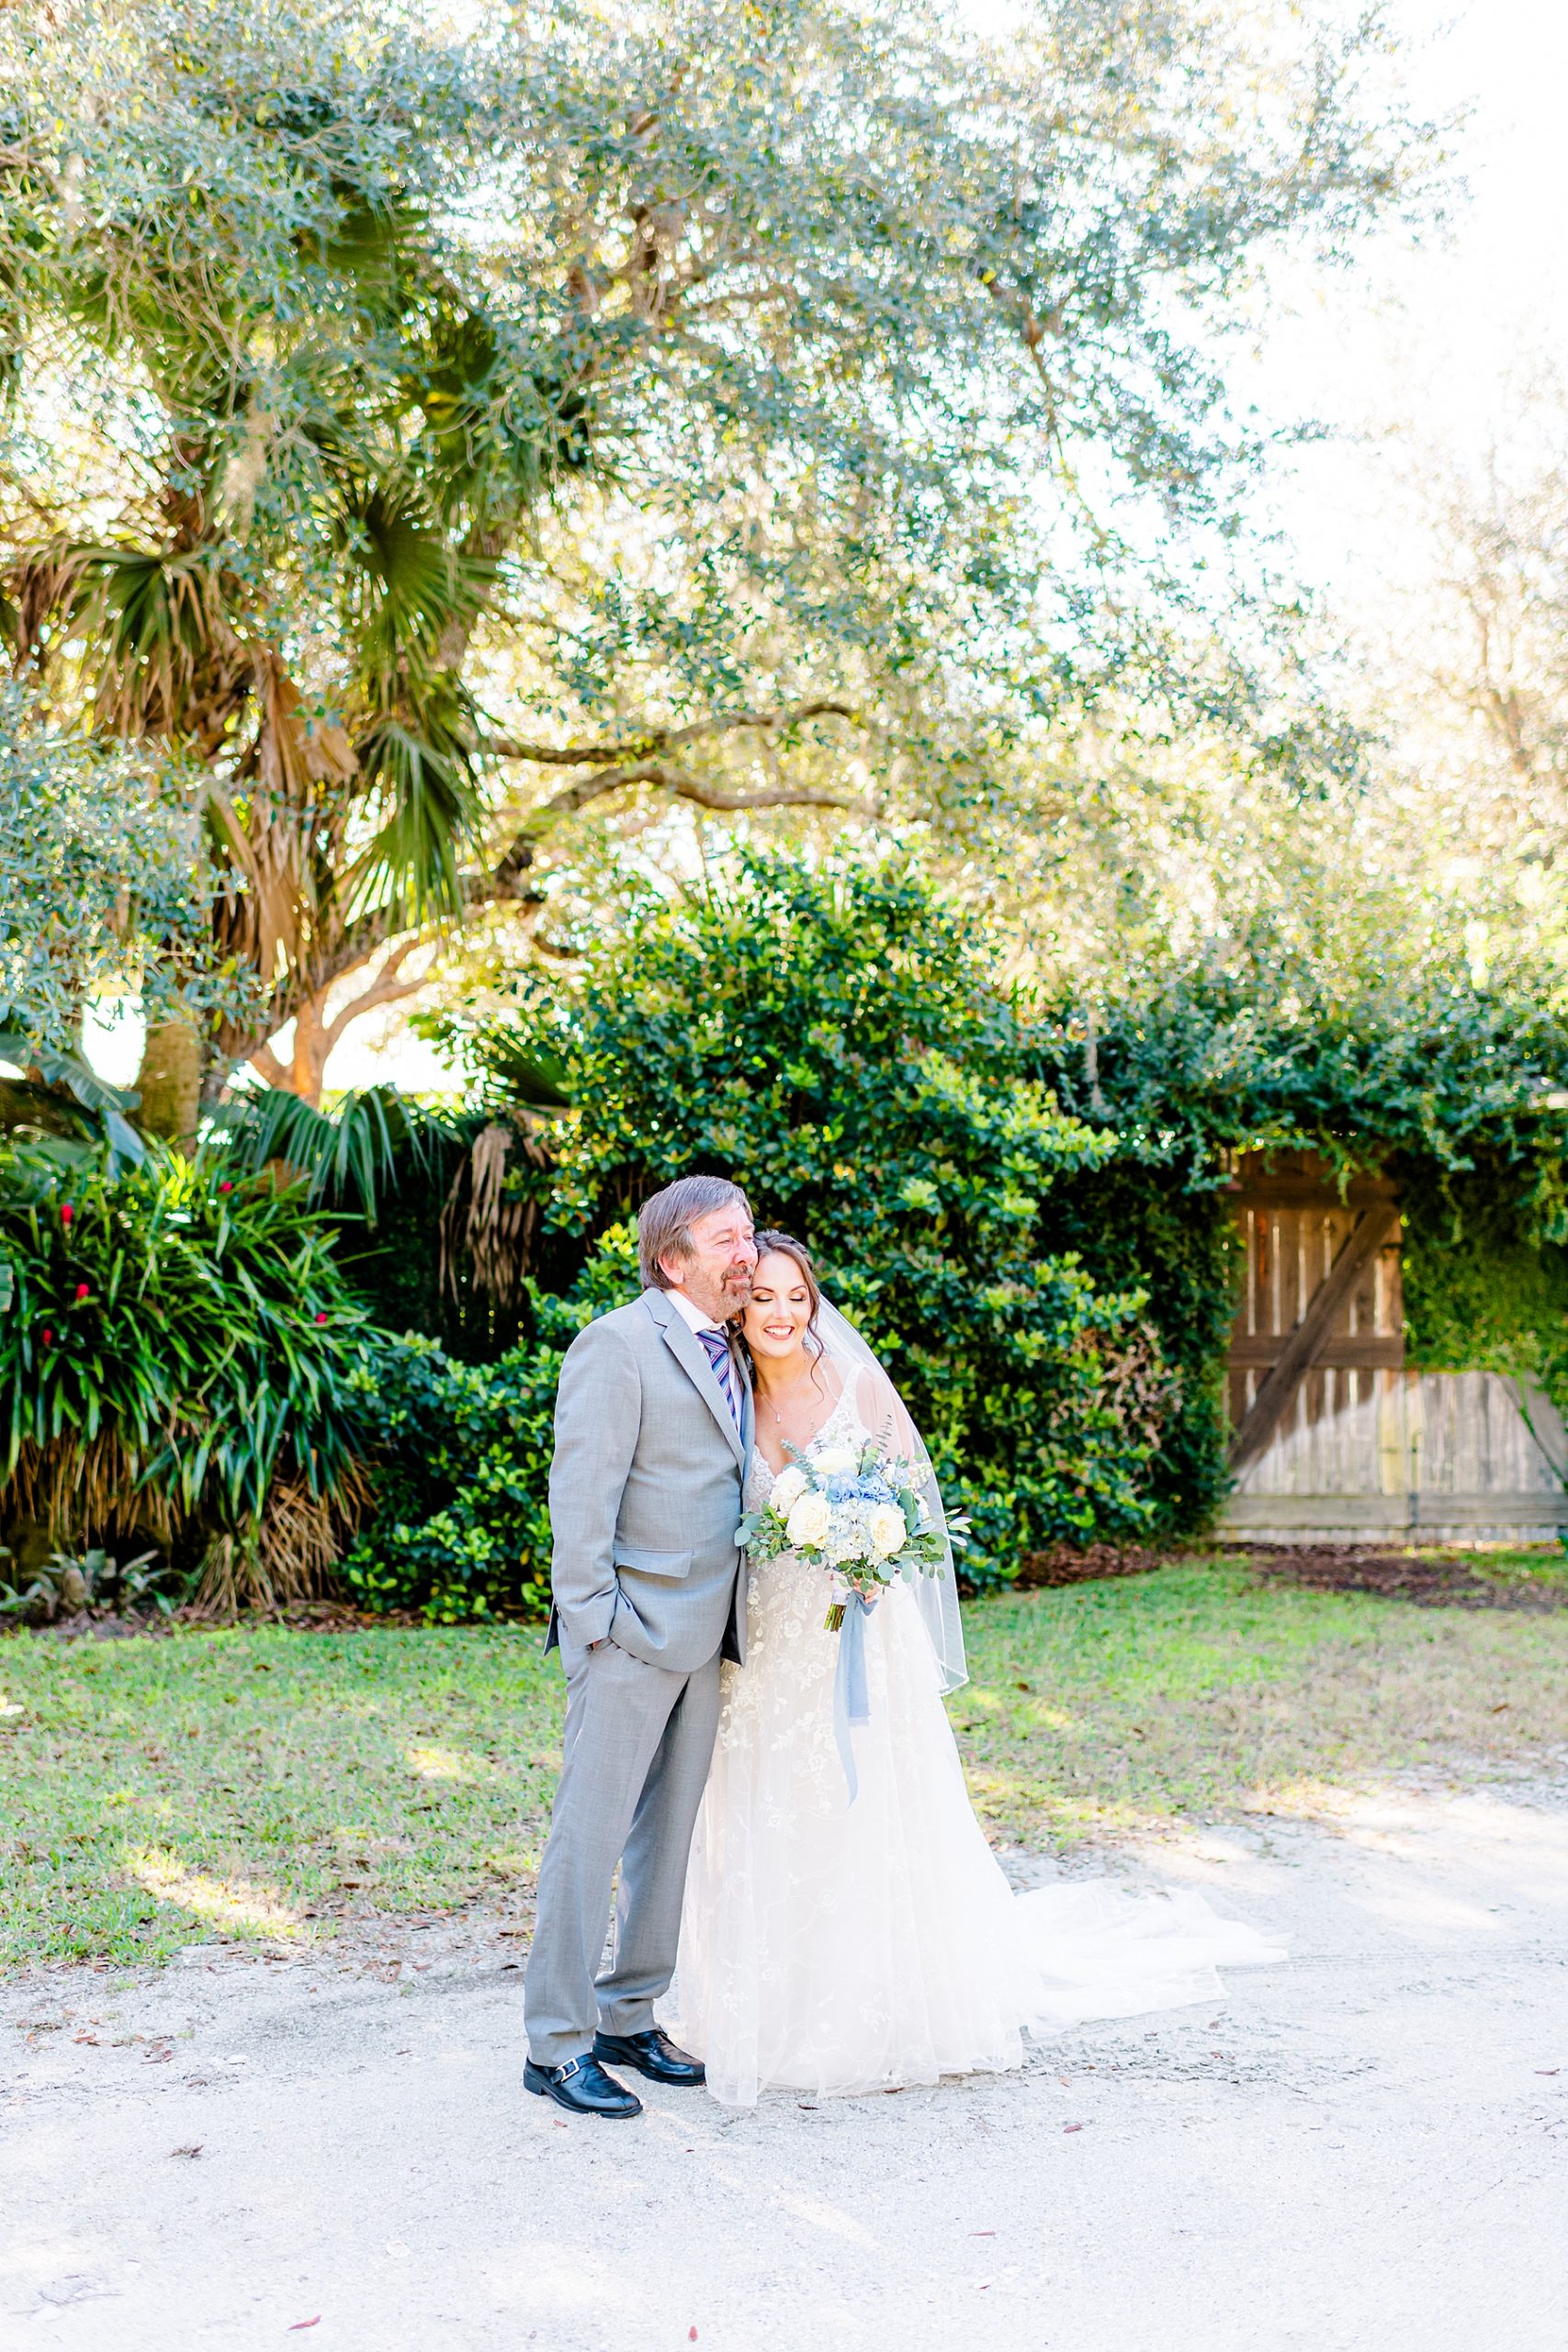 Delamater Wedding | The Delamater House Wedding | Chynna Pacheco Photography-393